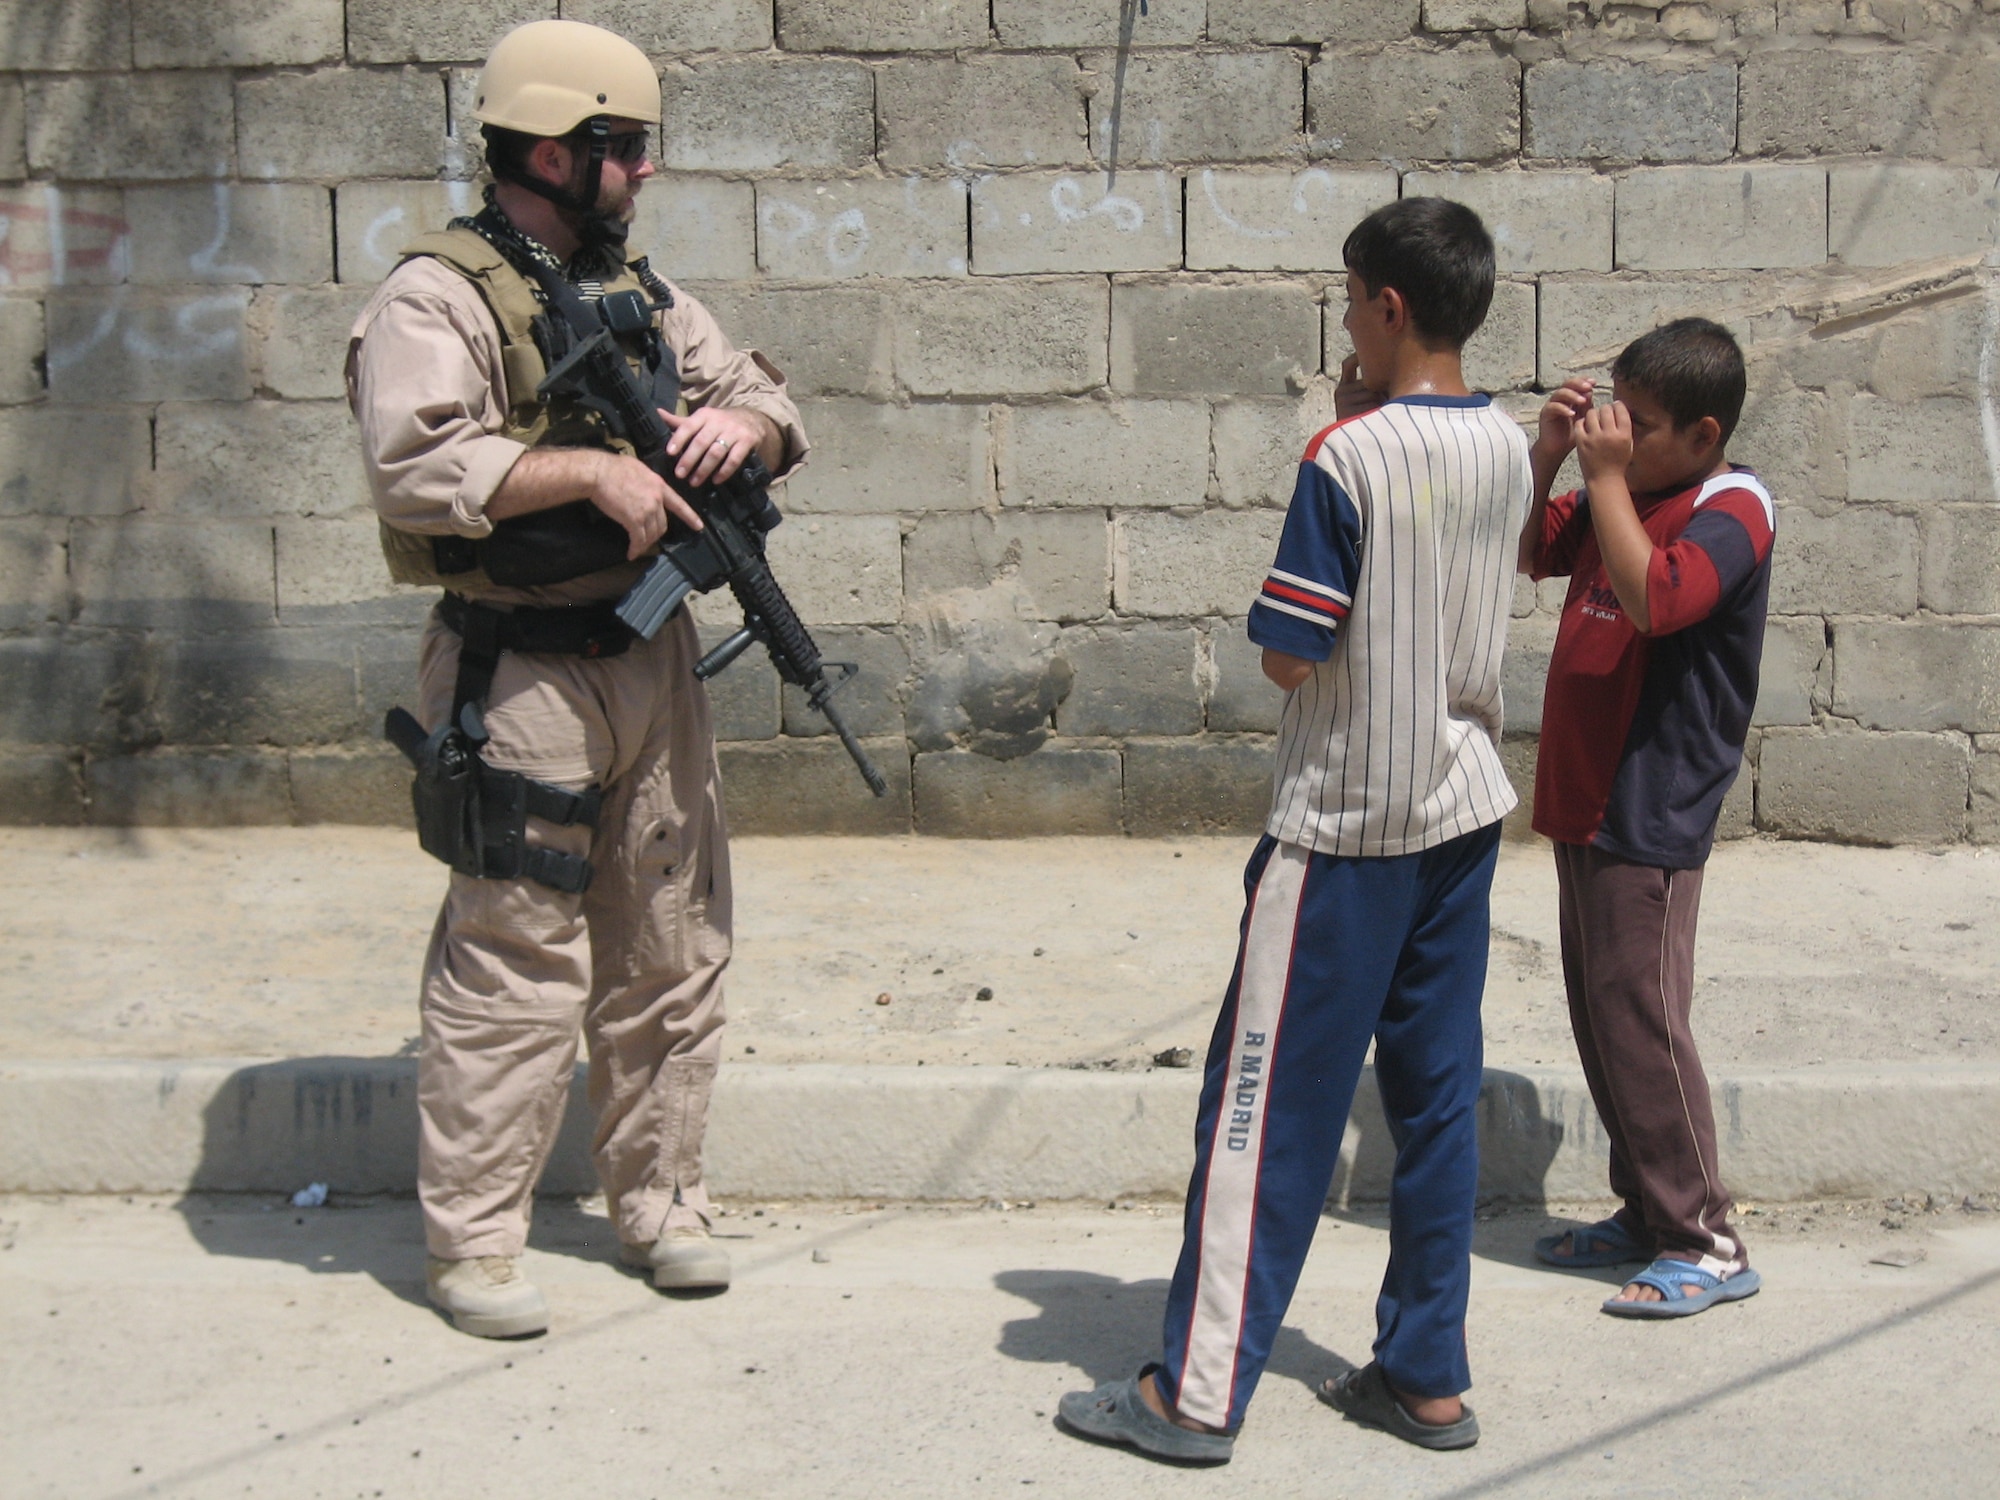 Air Force Office of Special Investigations Special Agent Joshua Goodwin talks to Iraqi children while on patrol in Baghdad. AFOSI agents listen carefully and watch for clues, gathering information that will help them zero in on the insurgents they seek. (U.S. Air Force photo)